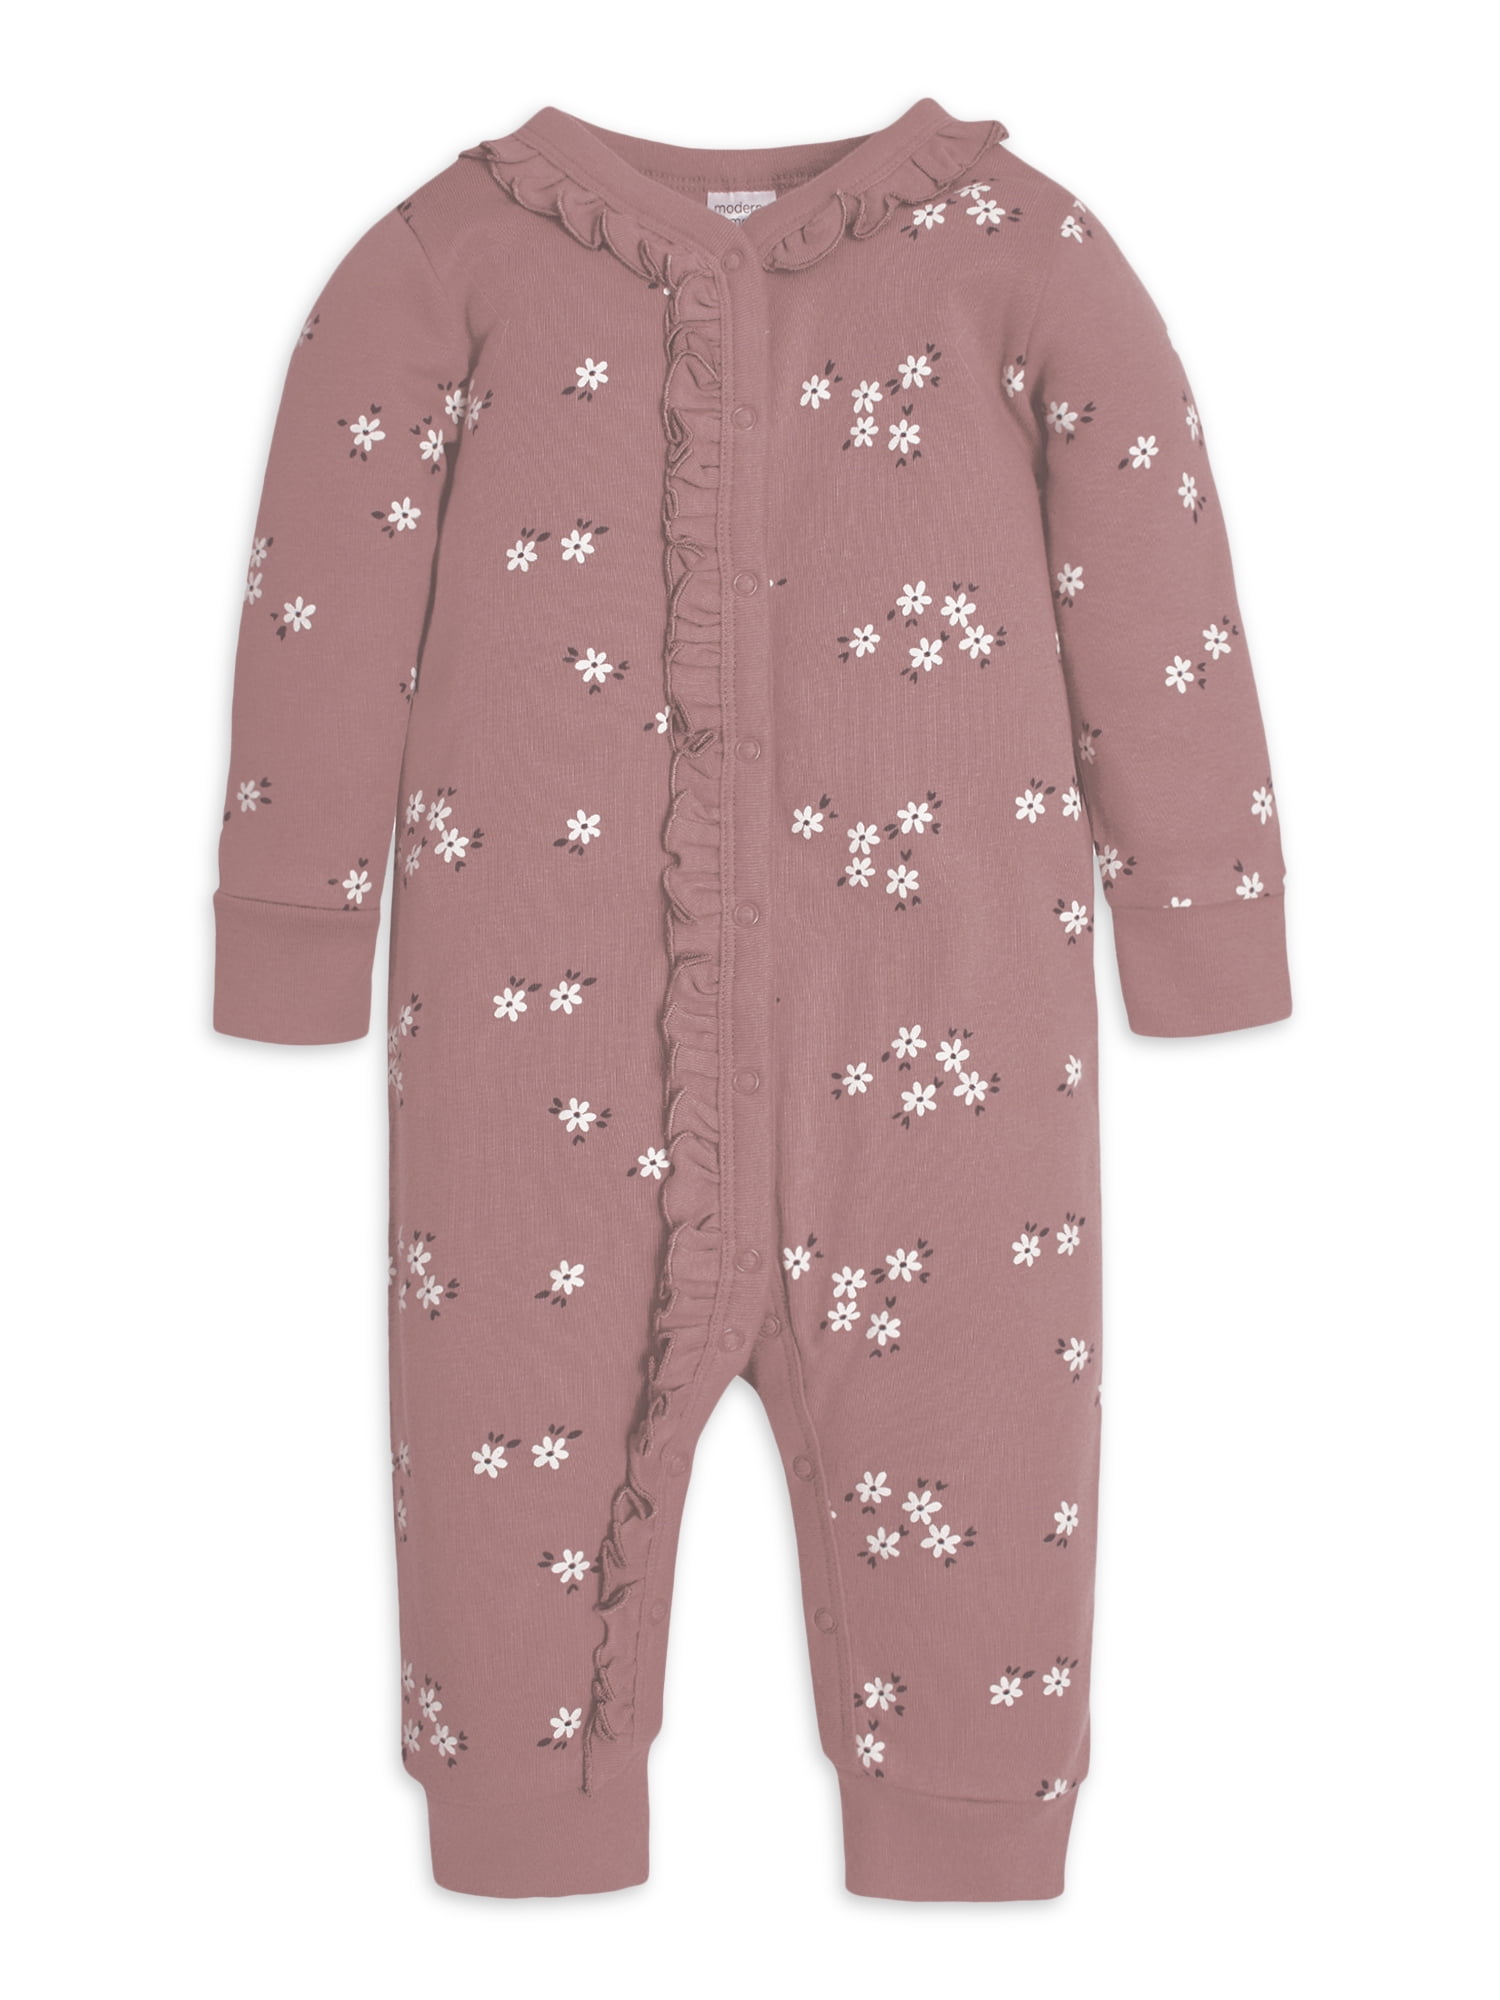 Modern Moments by Gerber Baby Girl Coverall With Mitten (Newborn - 0/3 Months)